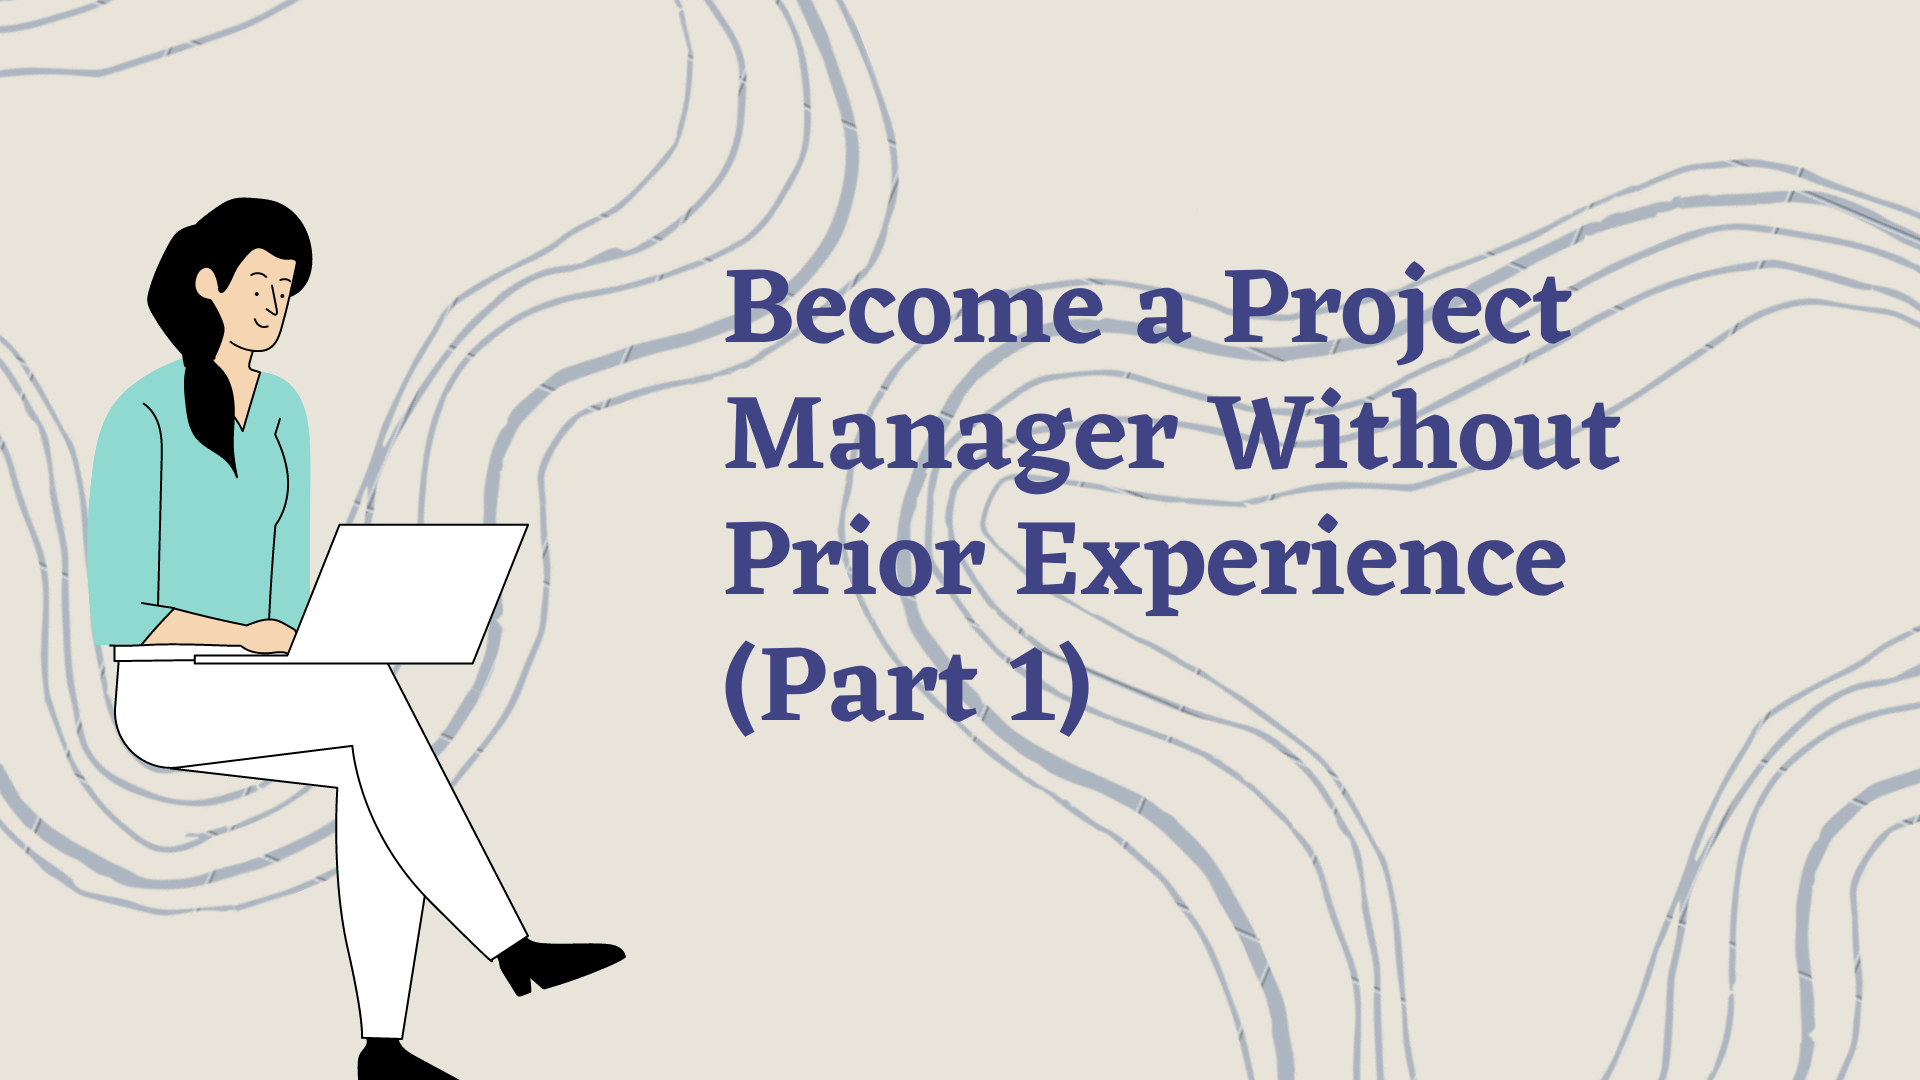 Become a Project Manager Without Prior Experience (Part 1)